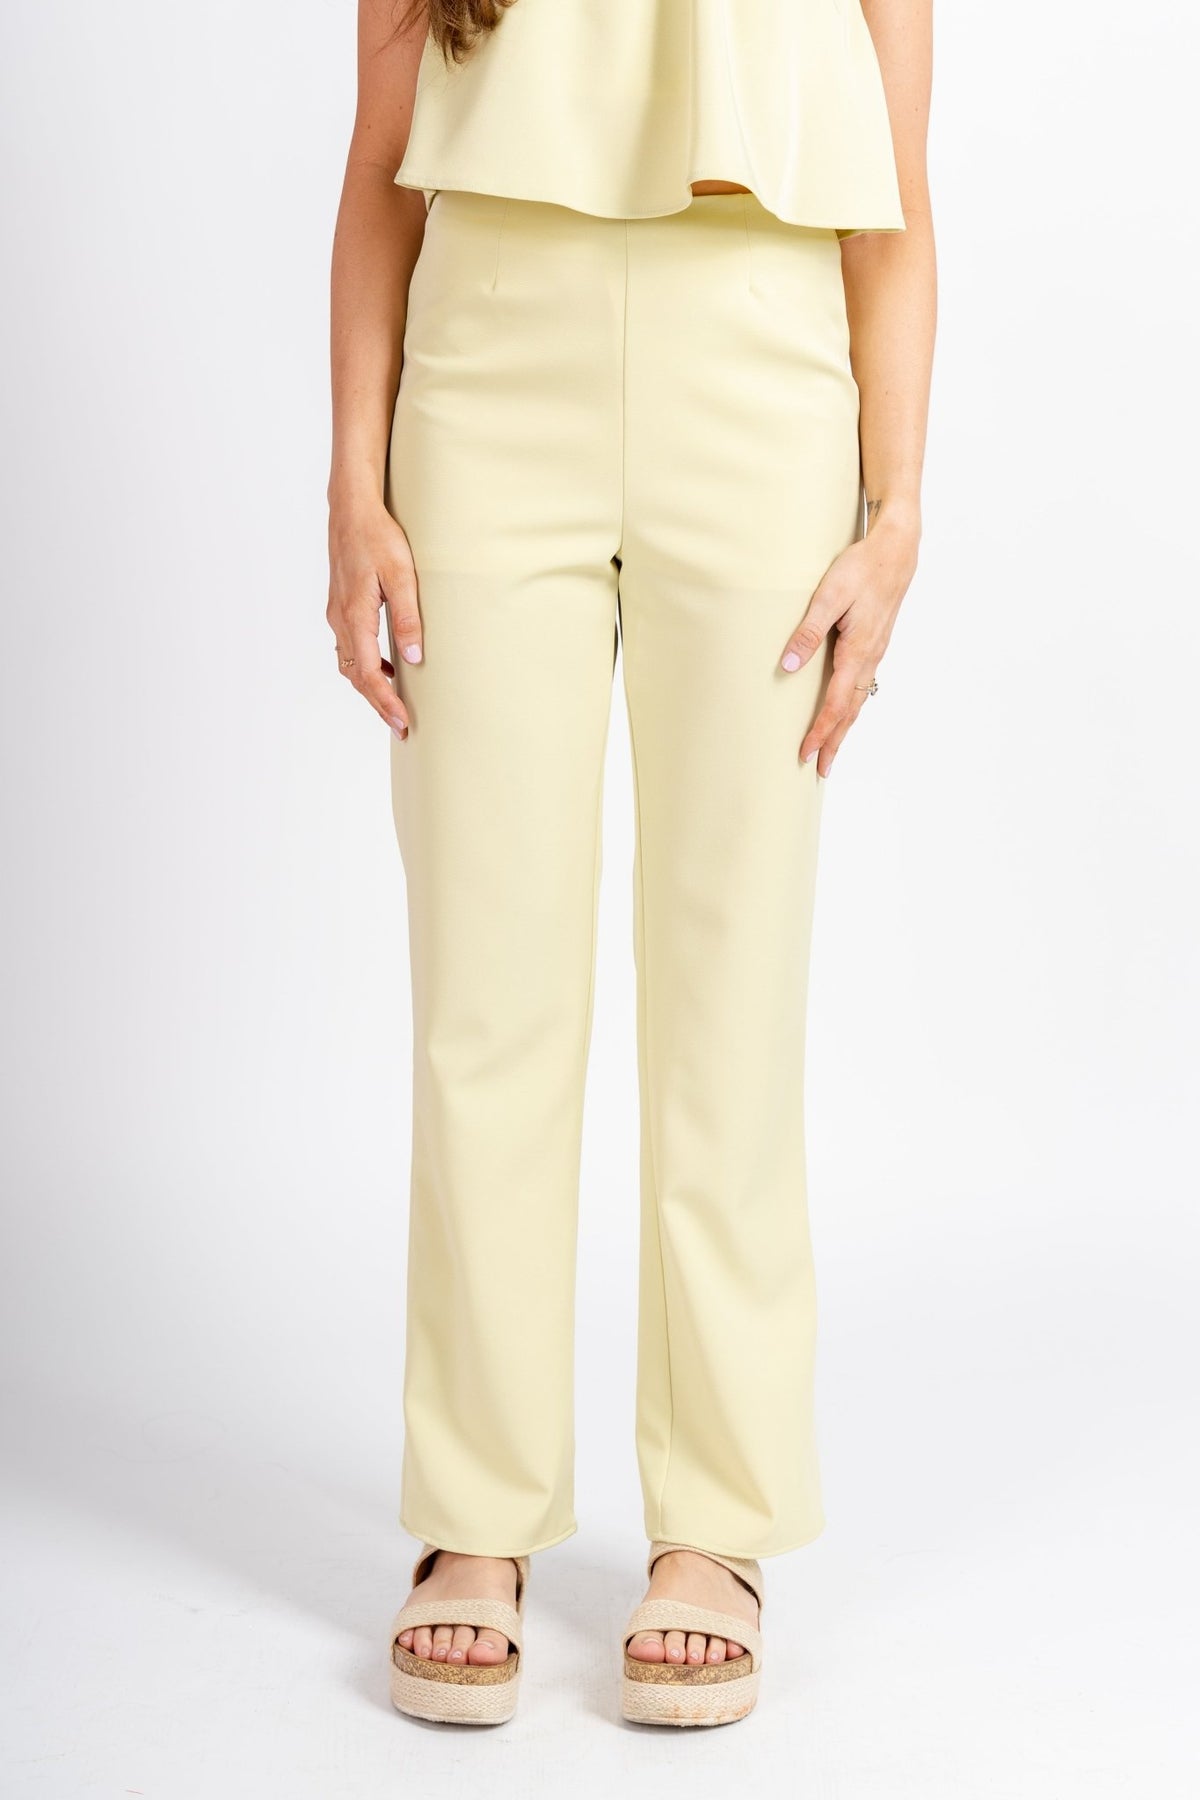 Wide leg midi pants citron - Trendy Pants - Cute Vacation Collection at Lush Fashion Lounge Boutique in Oklahoma City